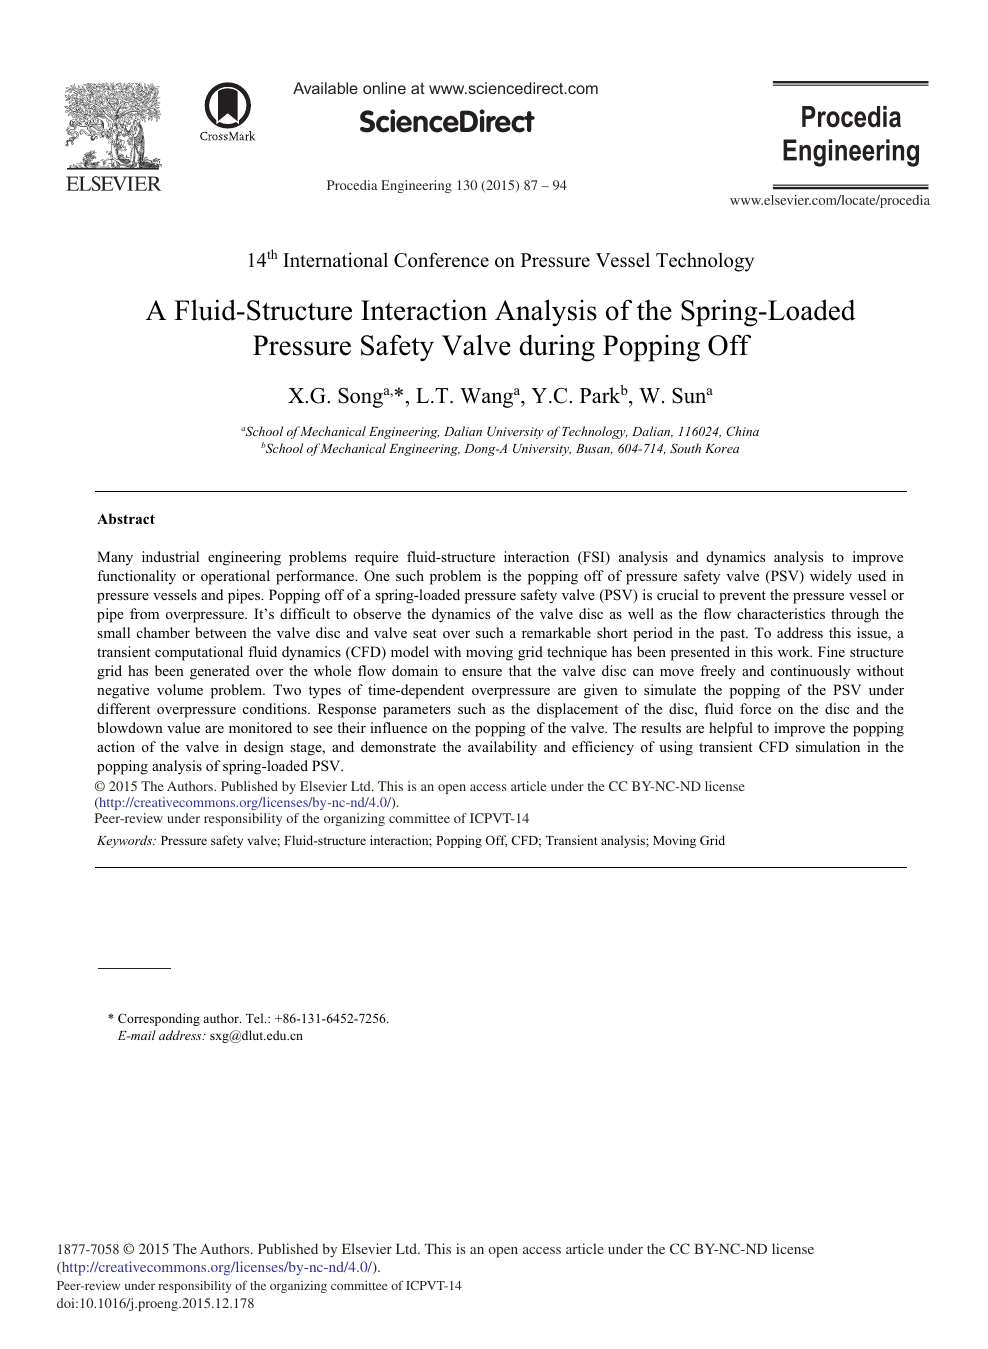 A Fluid Structure Interaction Analysis Of The Spring Loaded Pressure Safety Valve During Popping Off Topic Of Research Paper In Materials Engineering Download Scholarly Article Pdf And Read For Free On Cyberleninka Open